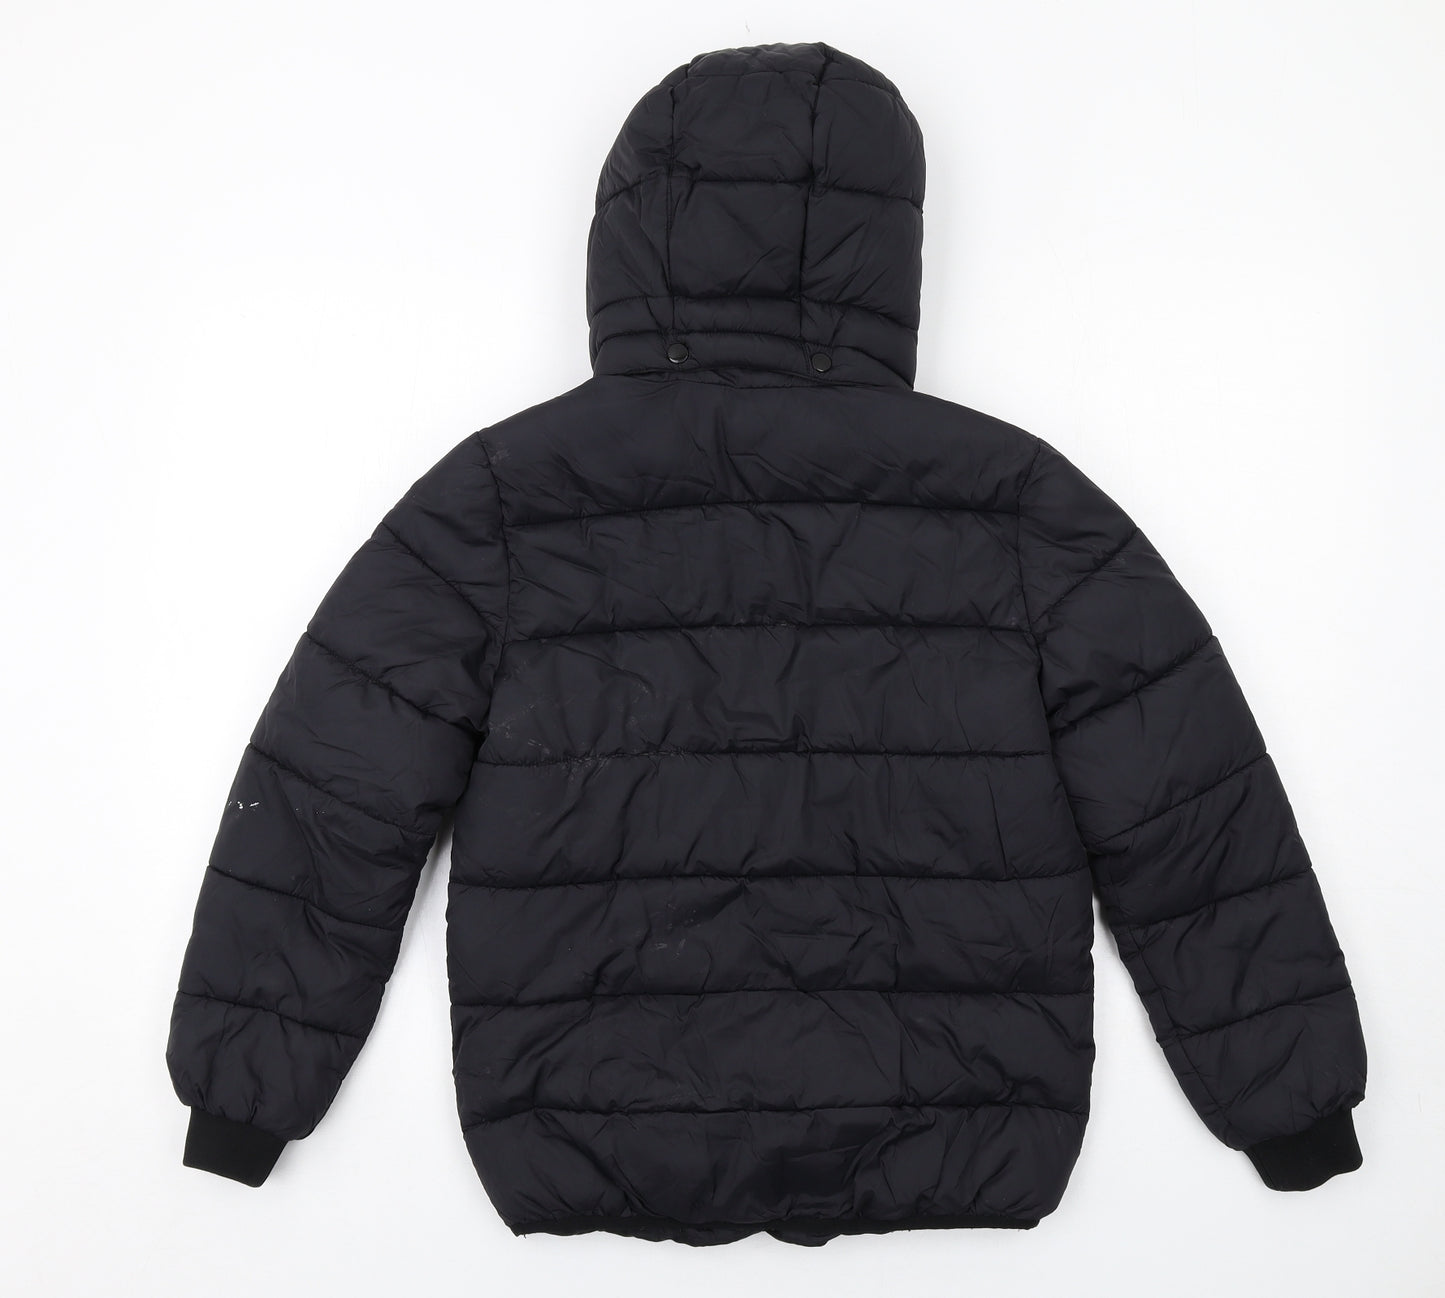 H&M Boys Black Quilted Jacket Size 10-11 Years Zip